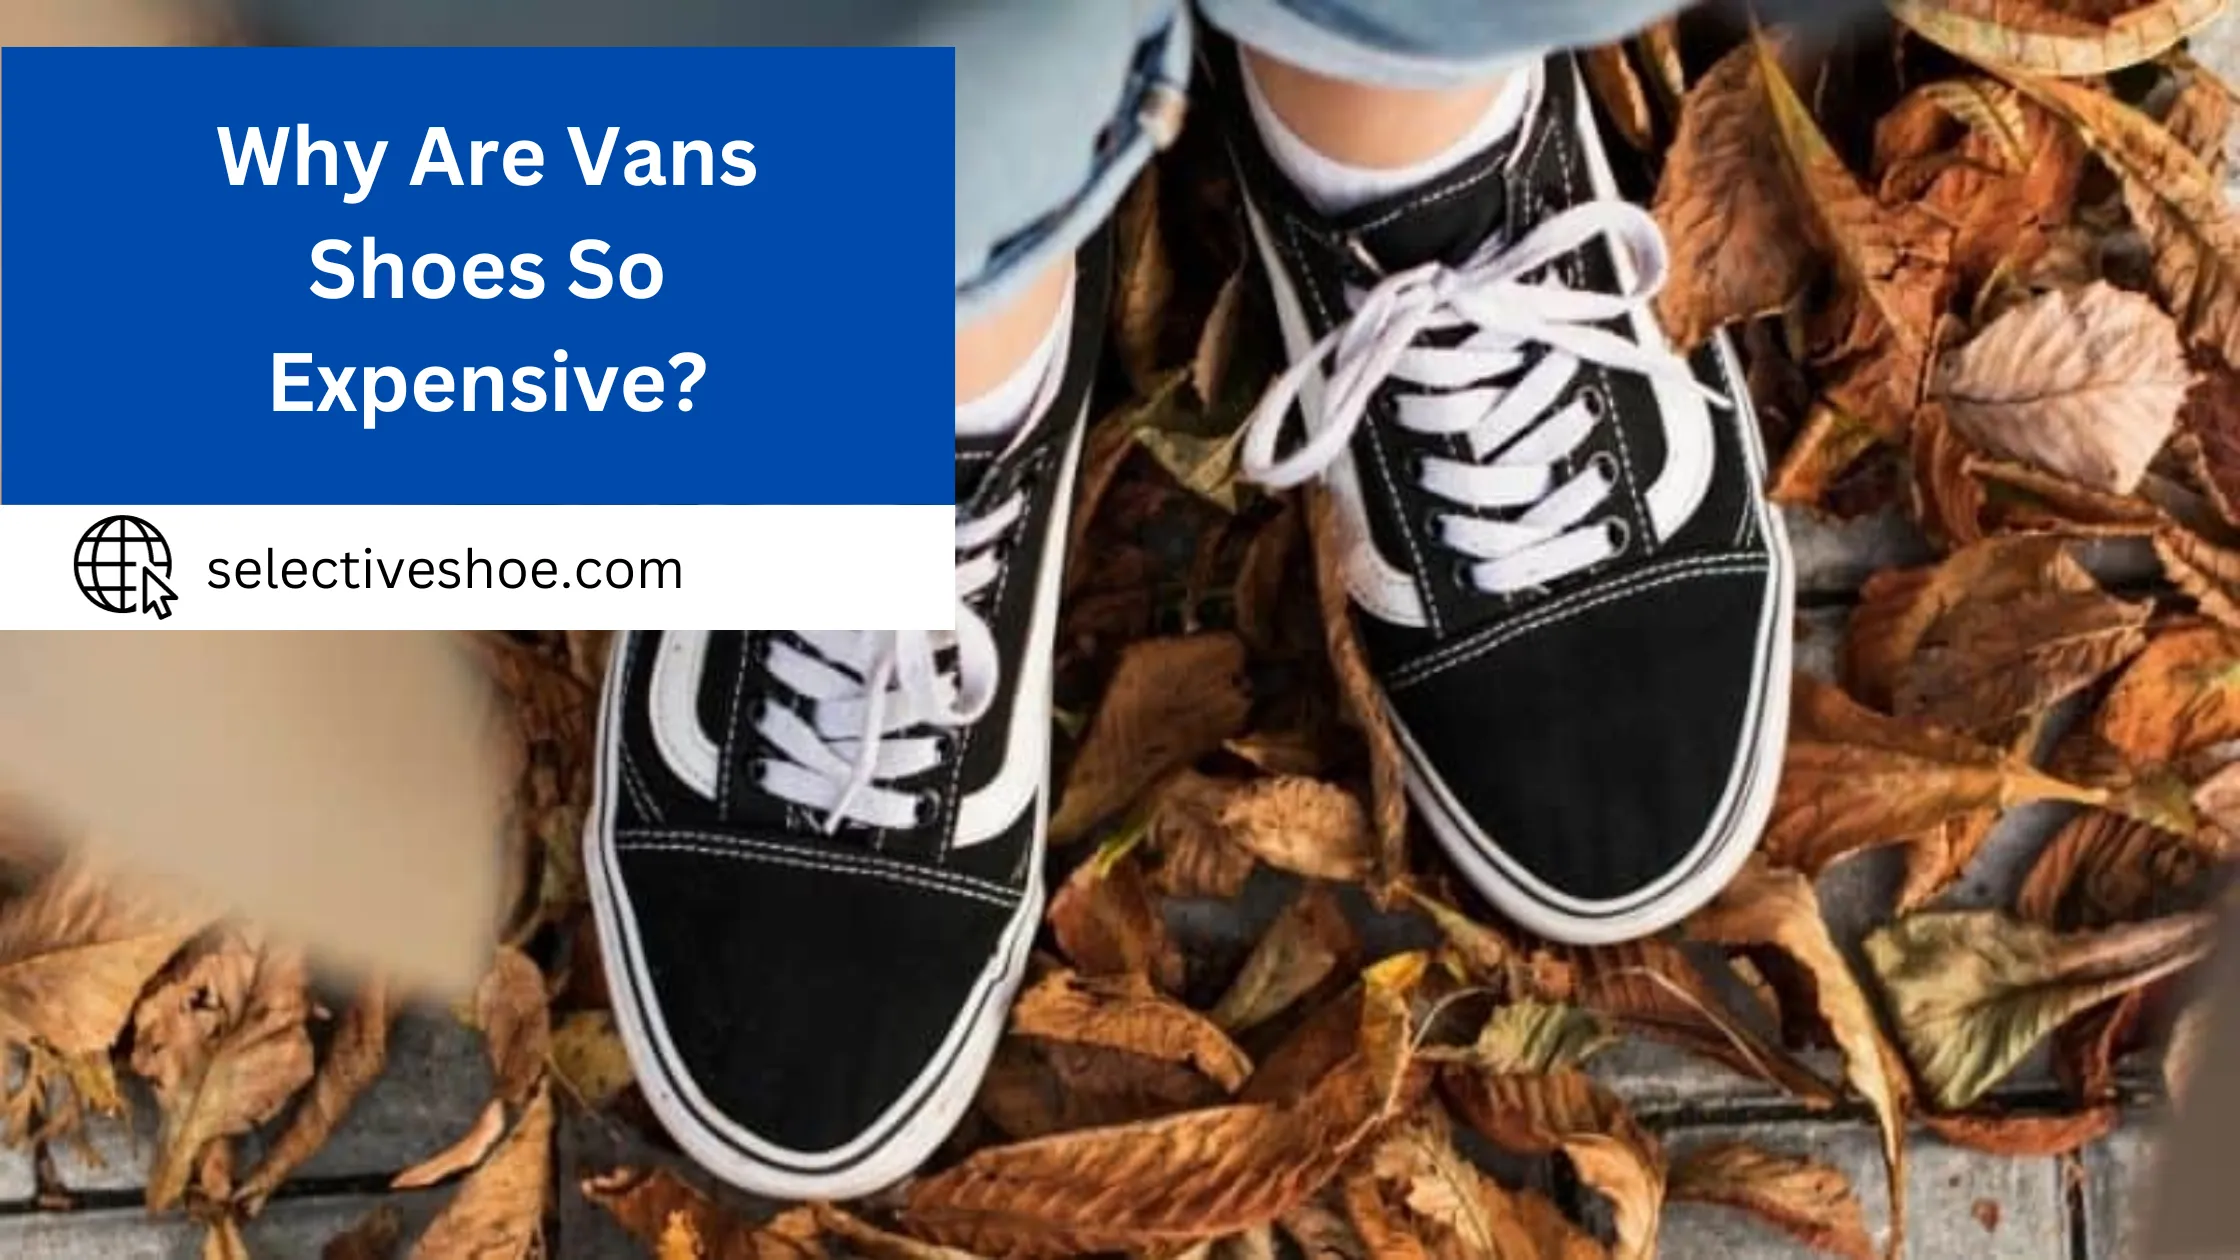 Why Are Vans Shoes So Expensive? Detailed Information